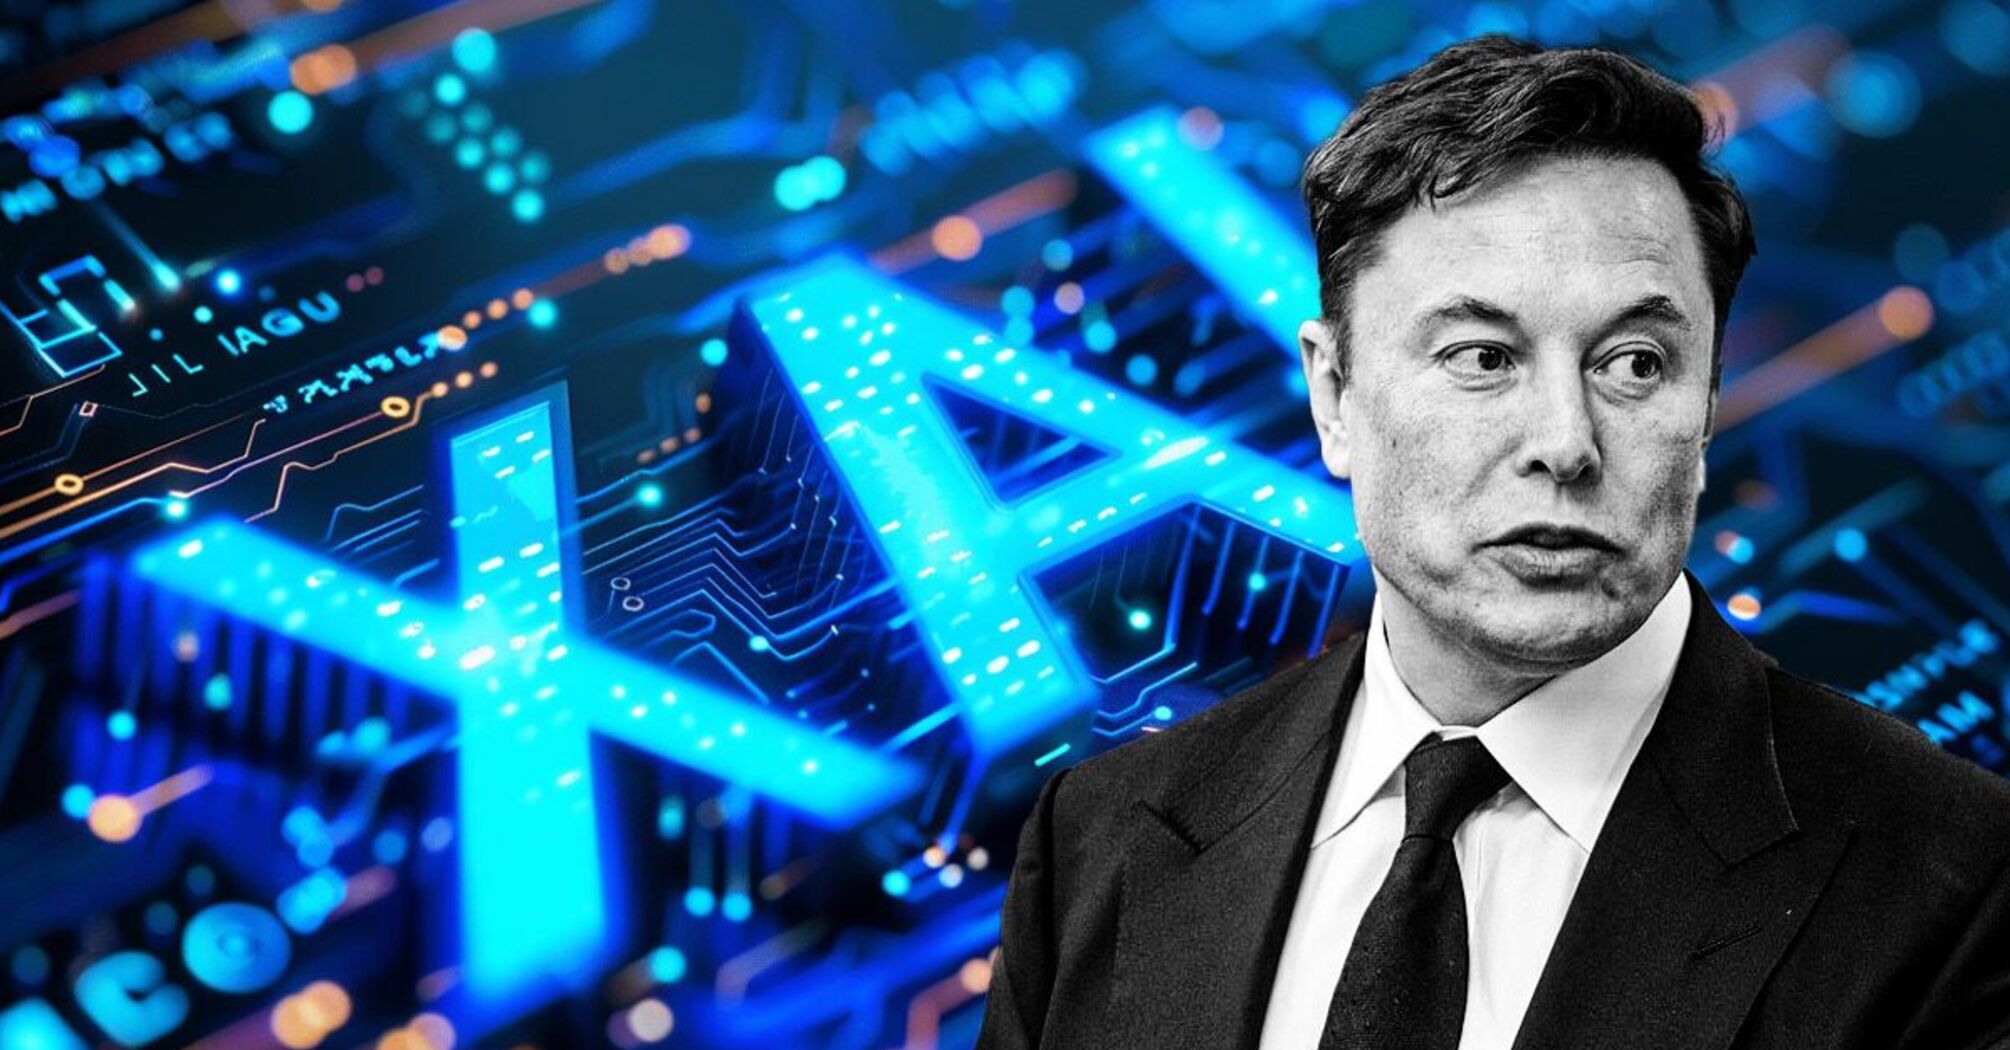 Elon Musk launches poll asking if Tesla should invest $5 billion in xAI